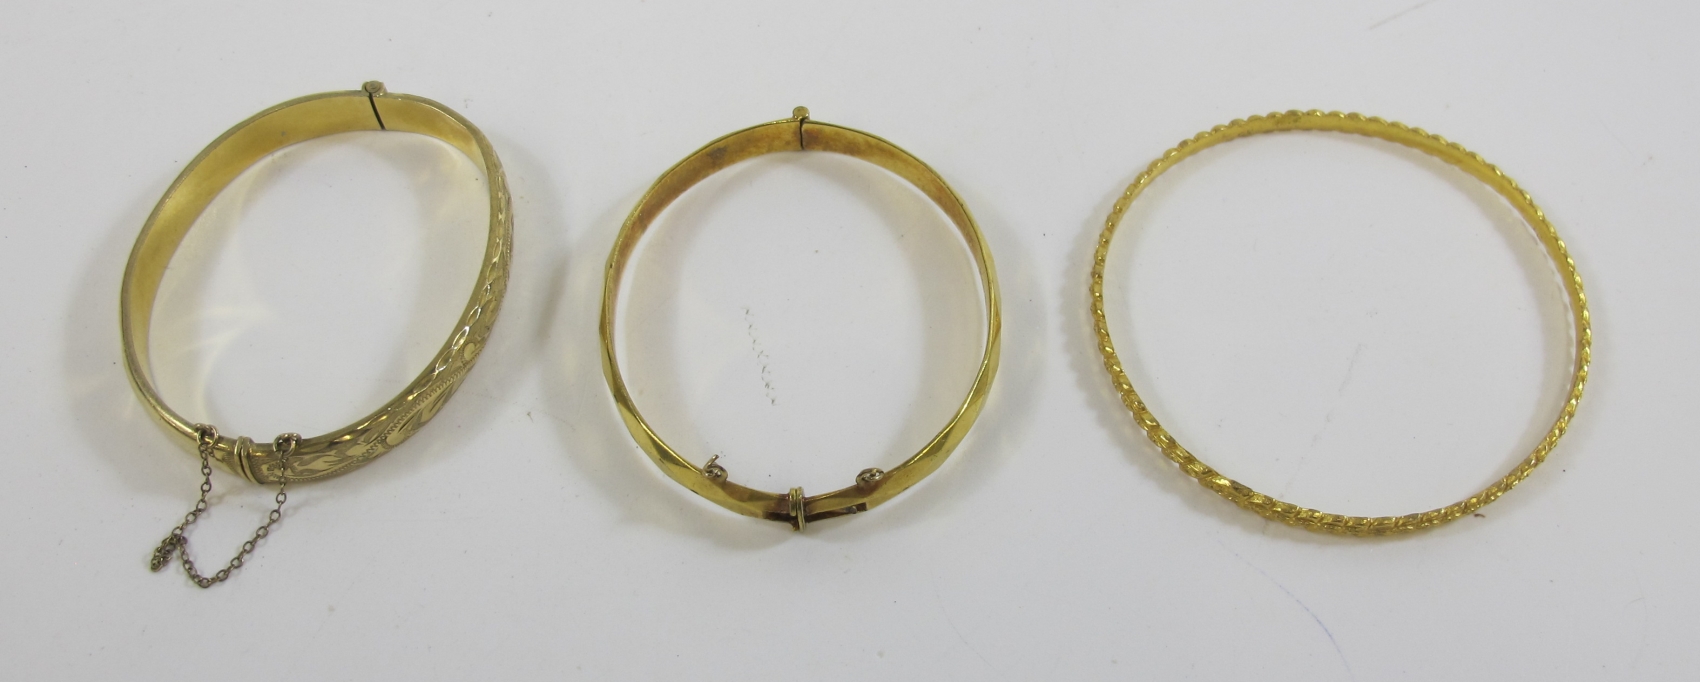 This is a Timed Online Auction on Bidspotter.co.uk, Click here to bid. 3 x Yellow metal bangles (est